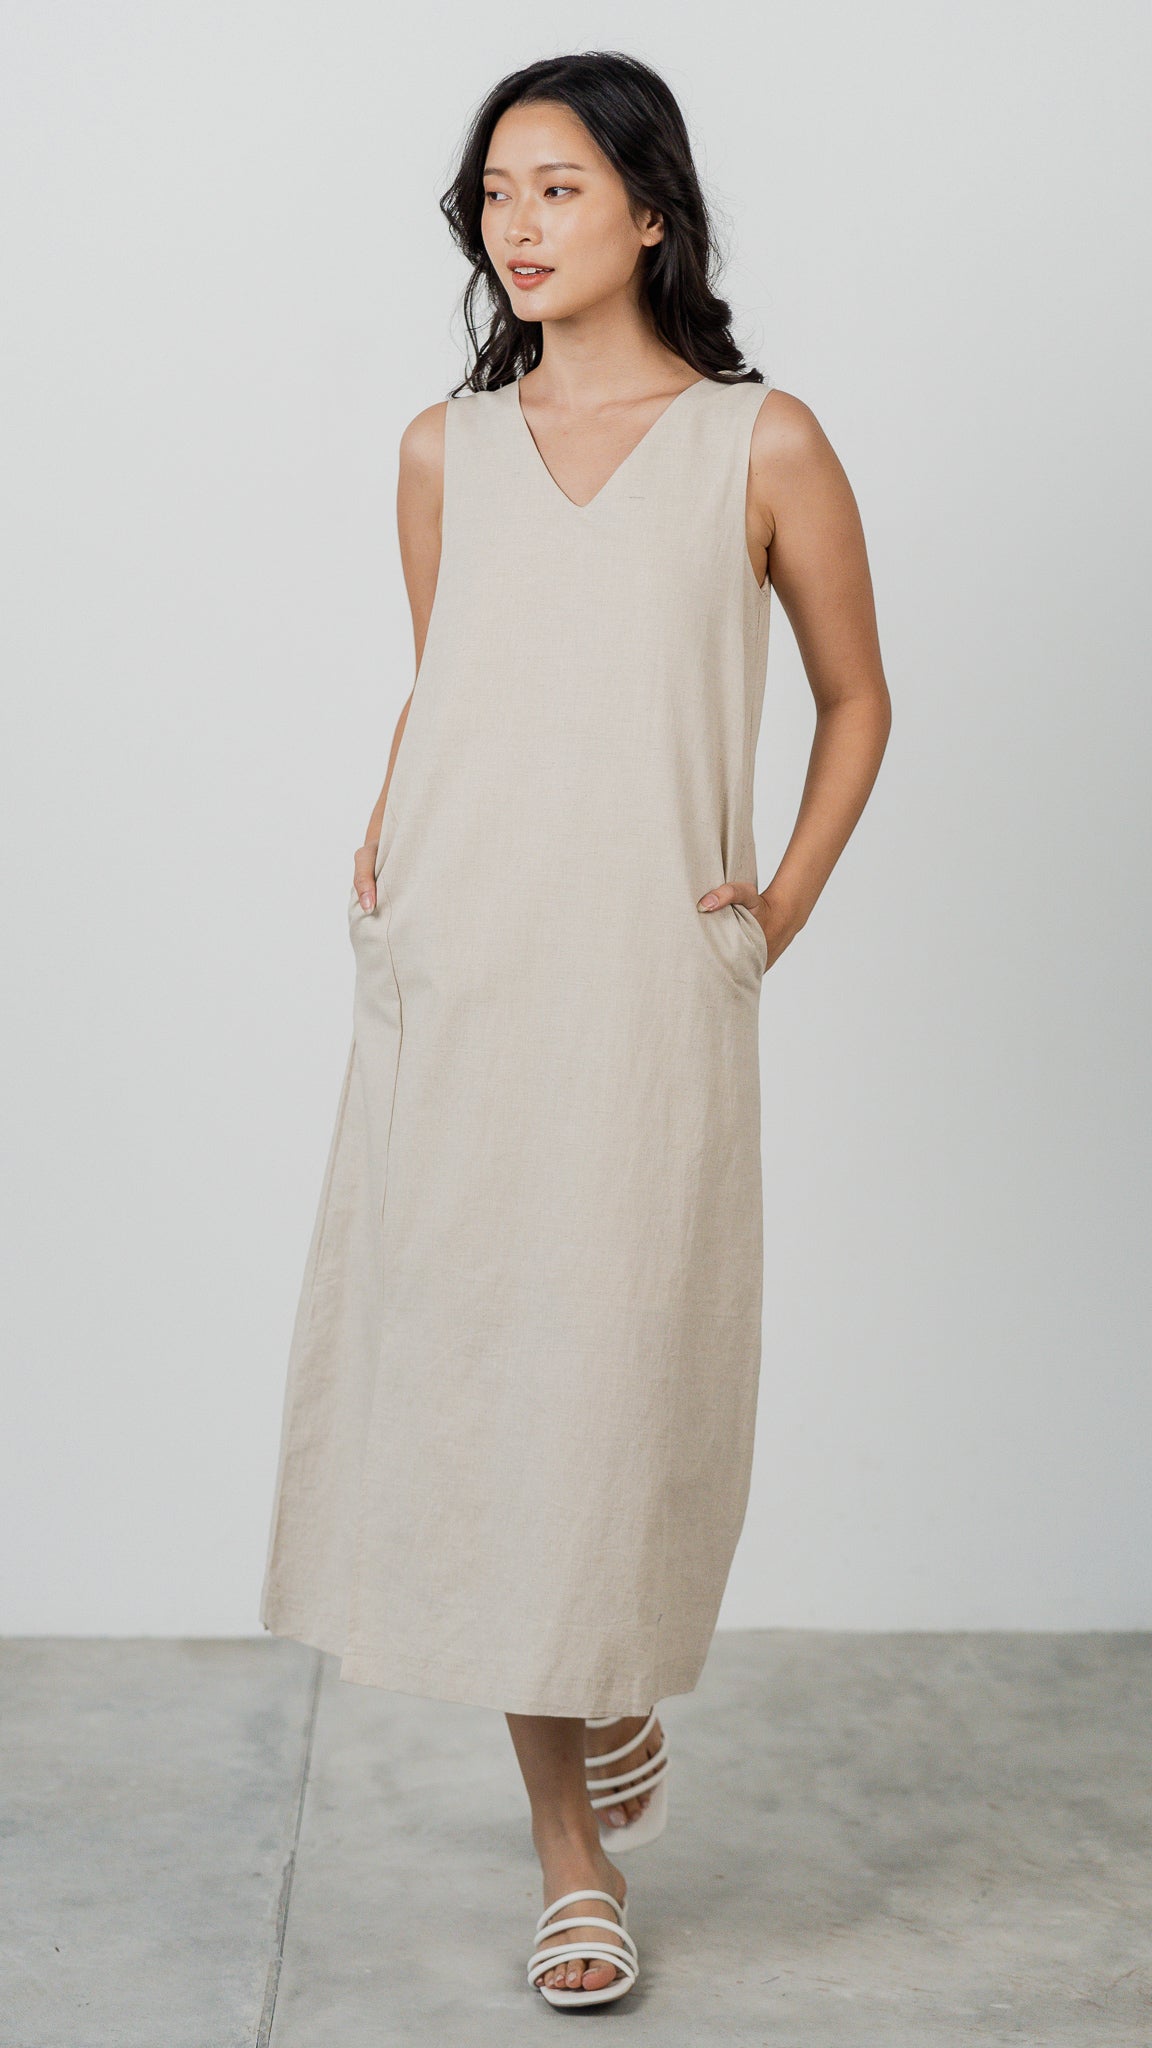 Seasons of Love Linen Dress in Linen Gray [ONLINE ONLY] - First Stitch